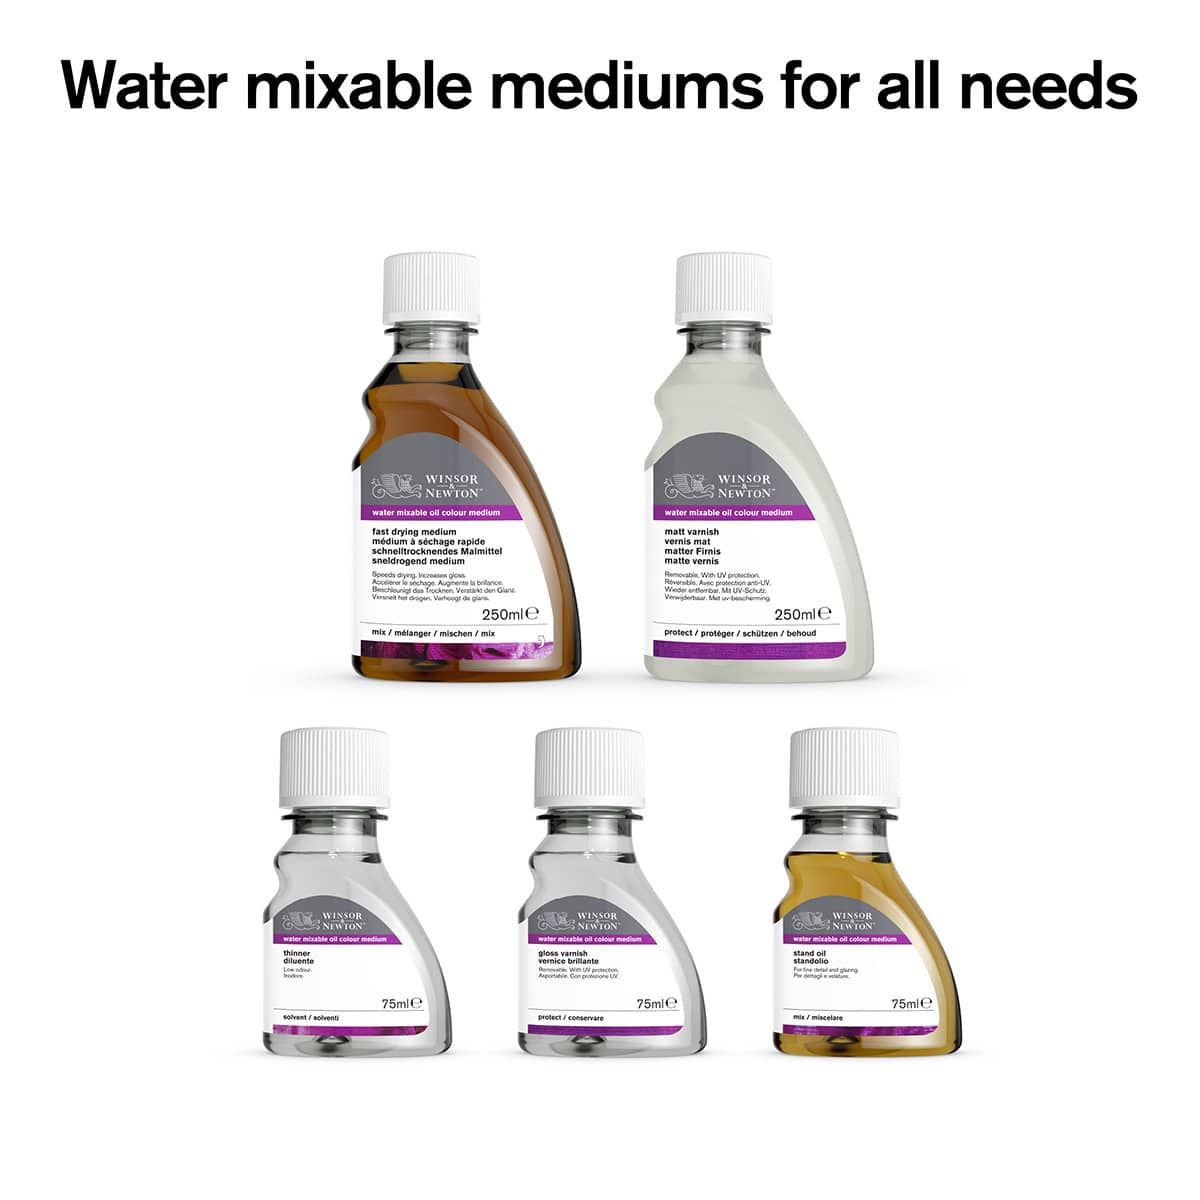 Water mixable mediums for all needs